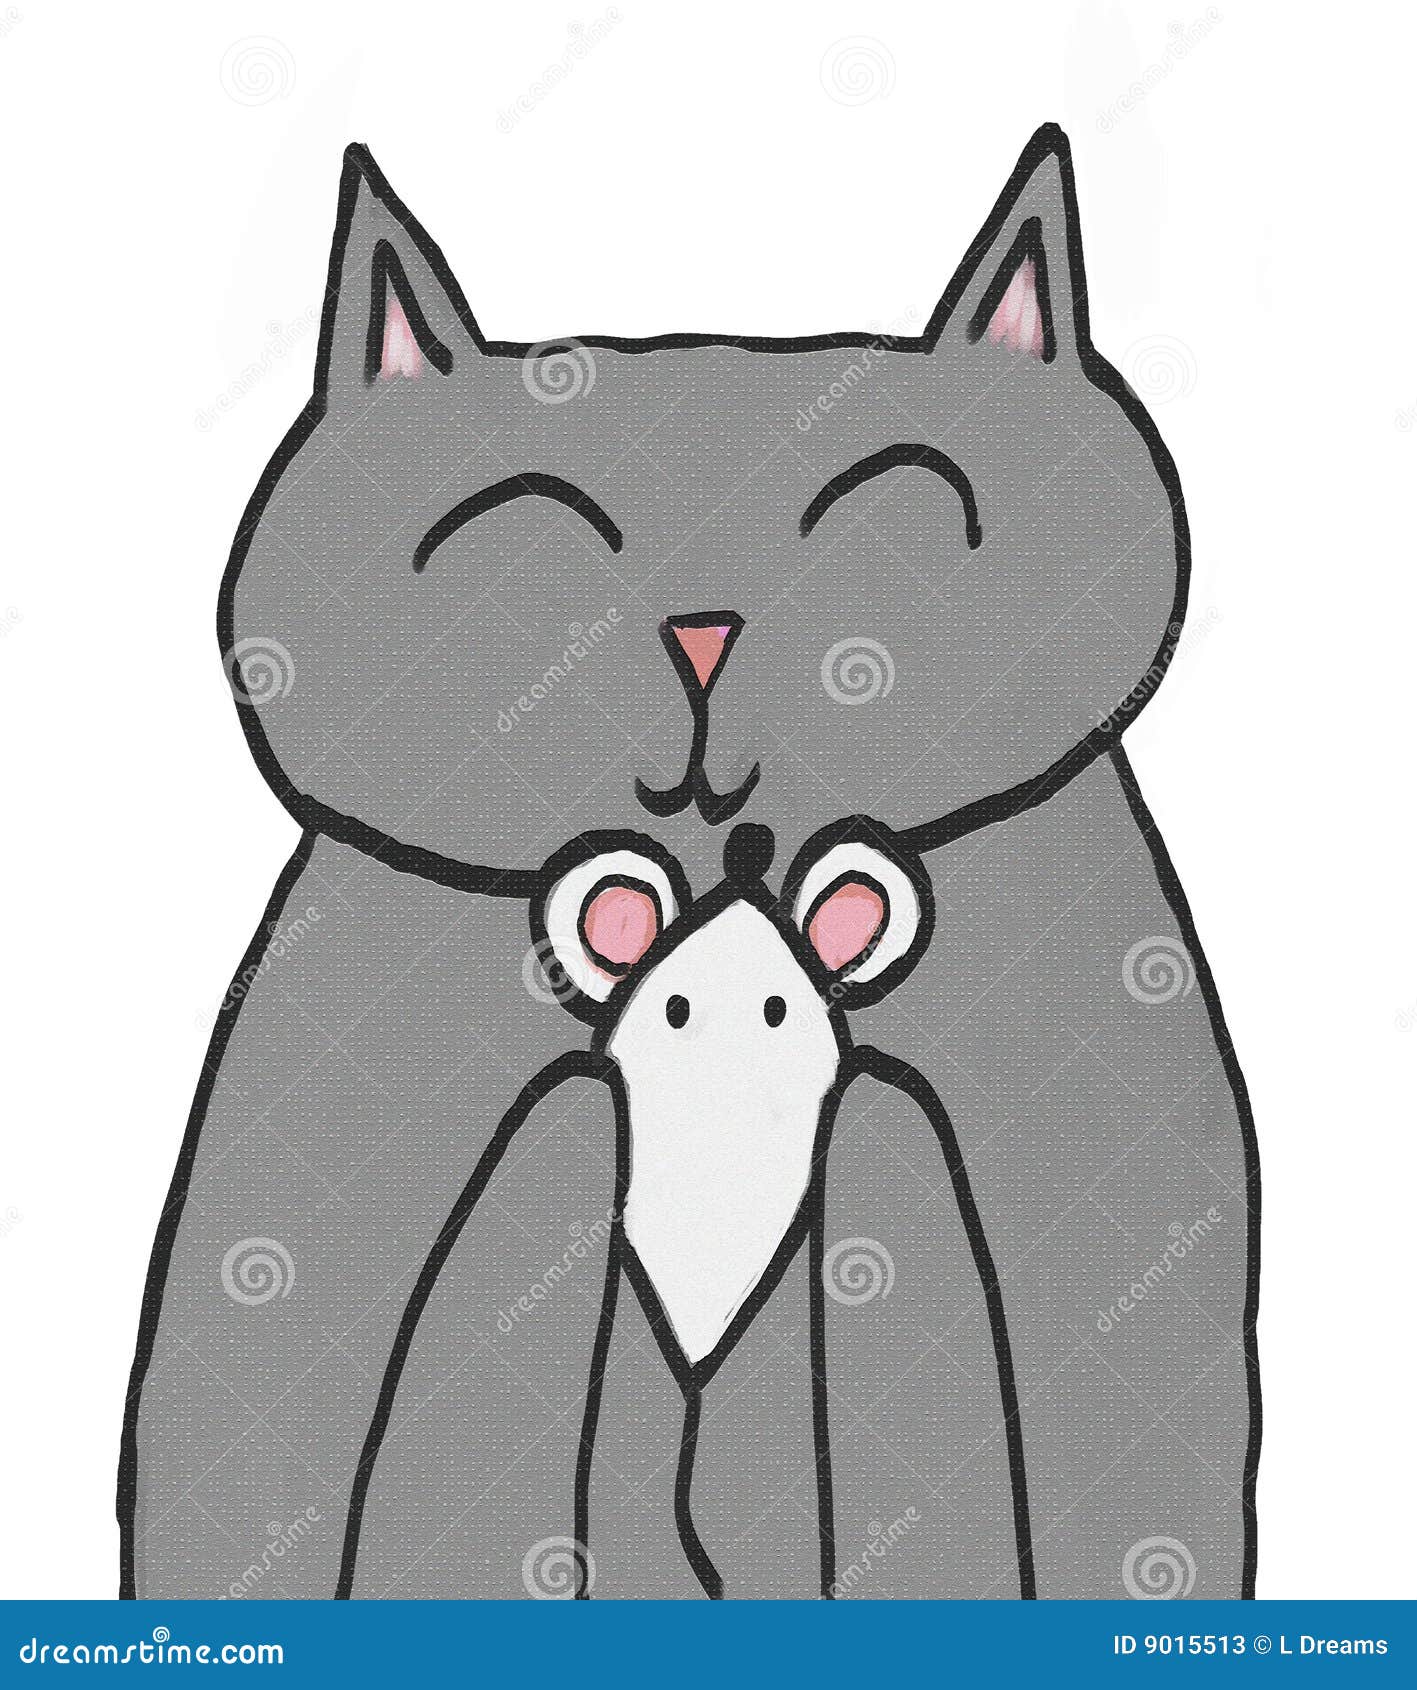 cat and mouse clip art free - photo #8